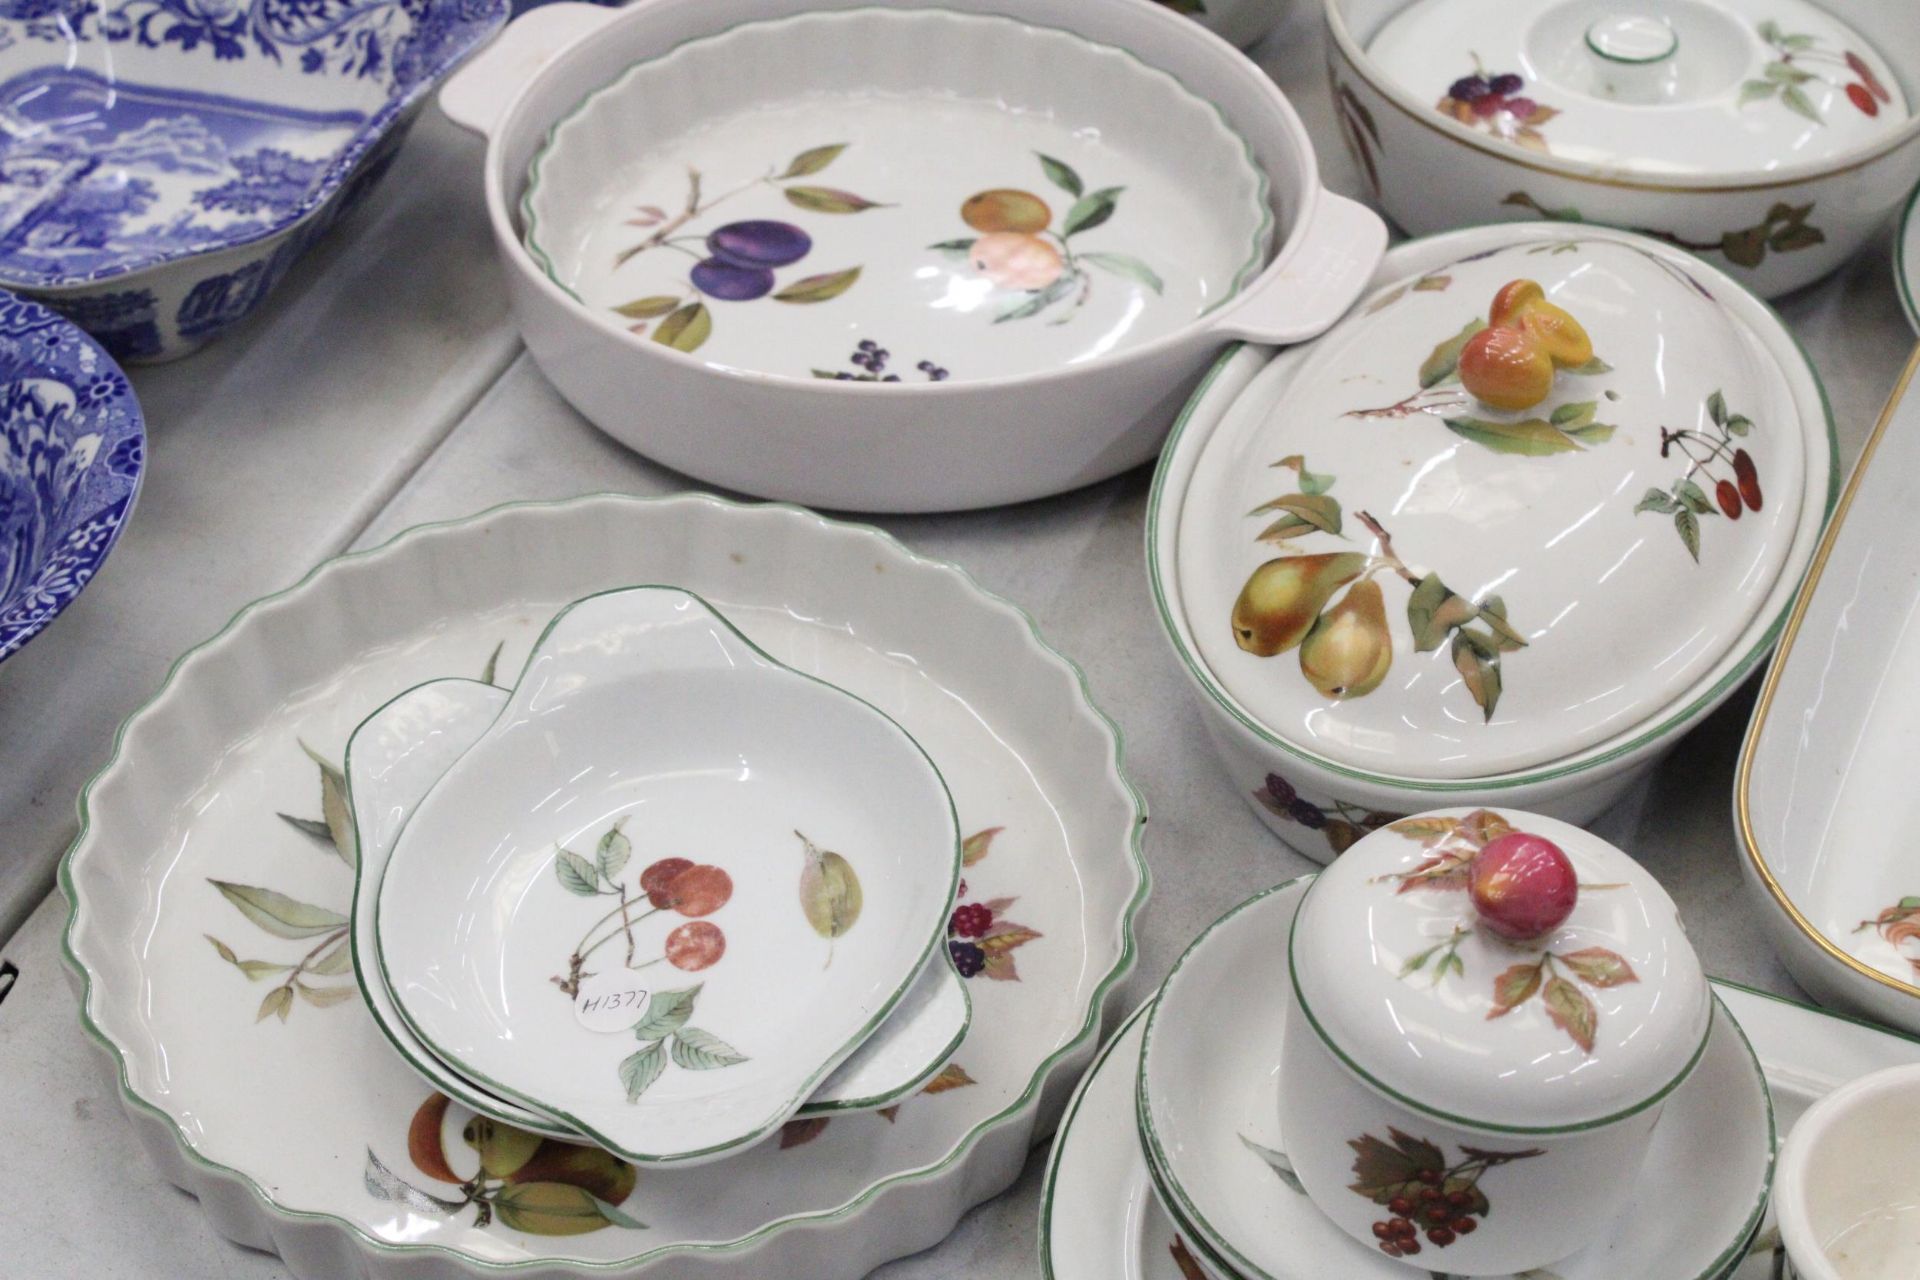 A QUANTITY OF ROYAL WORCESTER WARE TO INCLUDE PLATES, DISHES, PRESERVES JAR ETC - Image 5 of 7